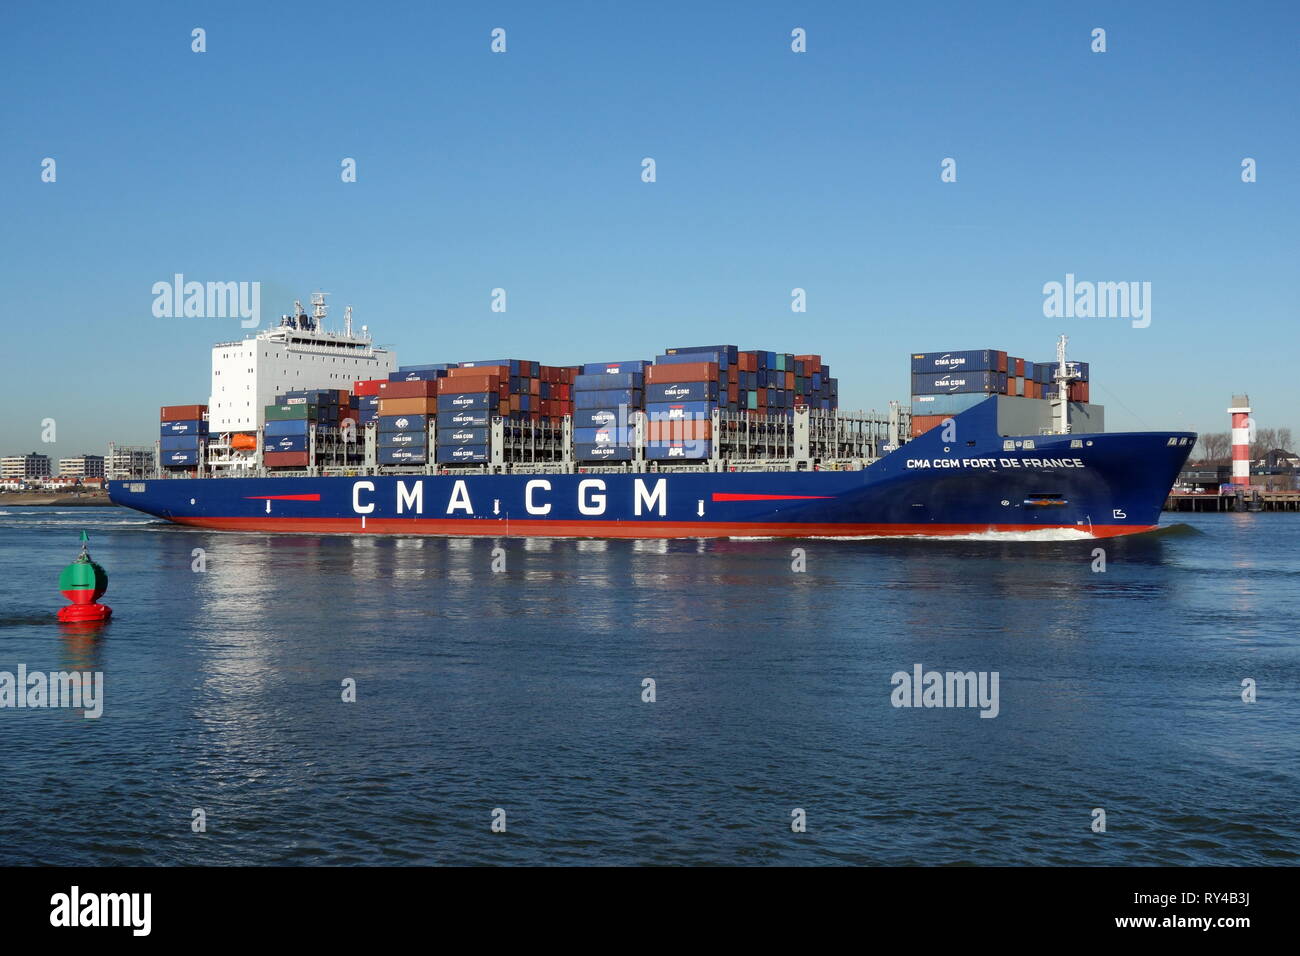 The container ship CMA CGM Fort de France will reach the port of Rotterdam on 15 February 2019. Stock Photo